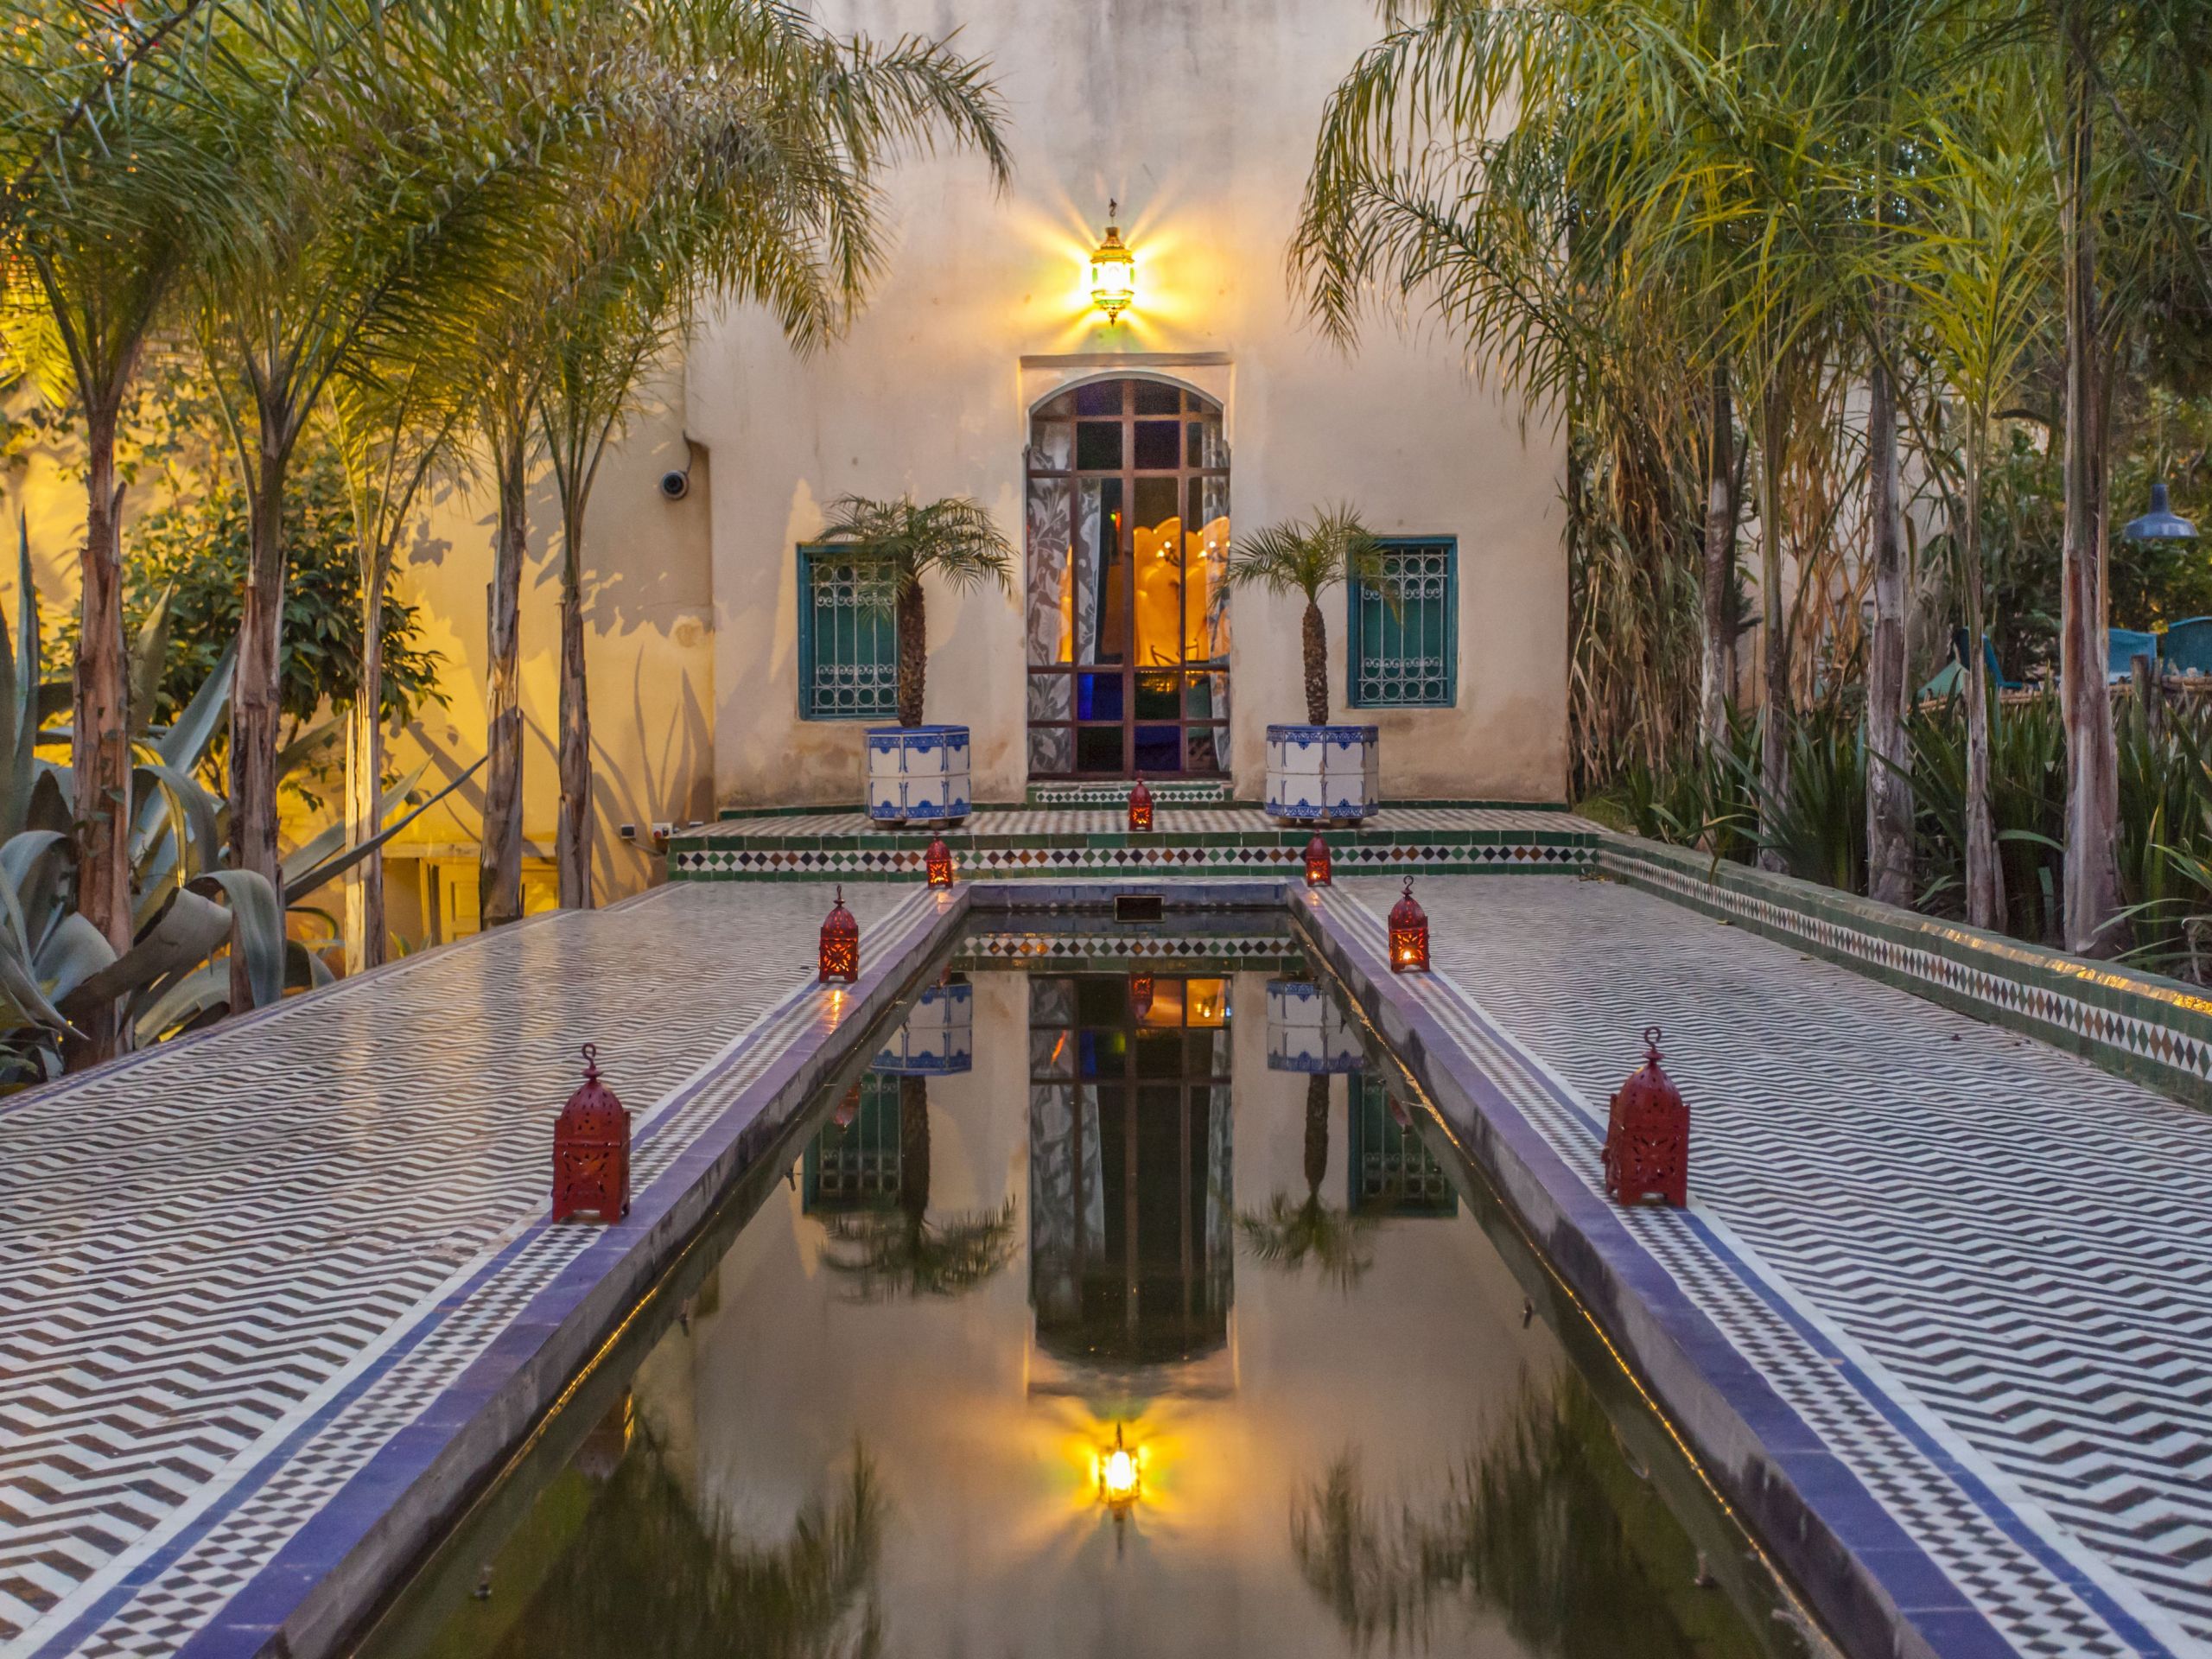 Table De Jardin Composite Génial the top 15 Things to See and Do In Morocco